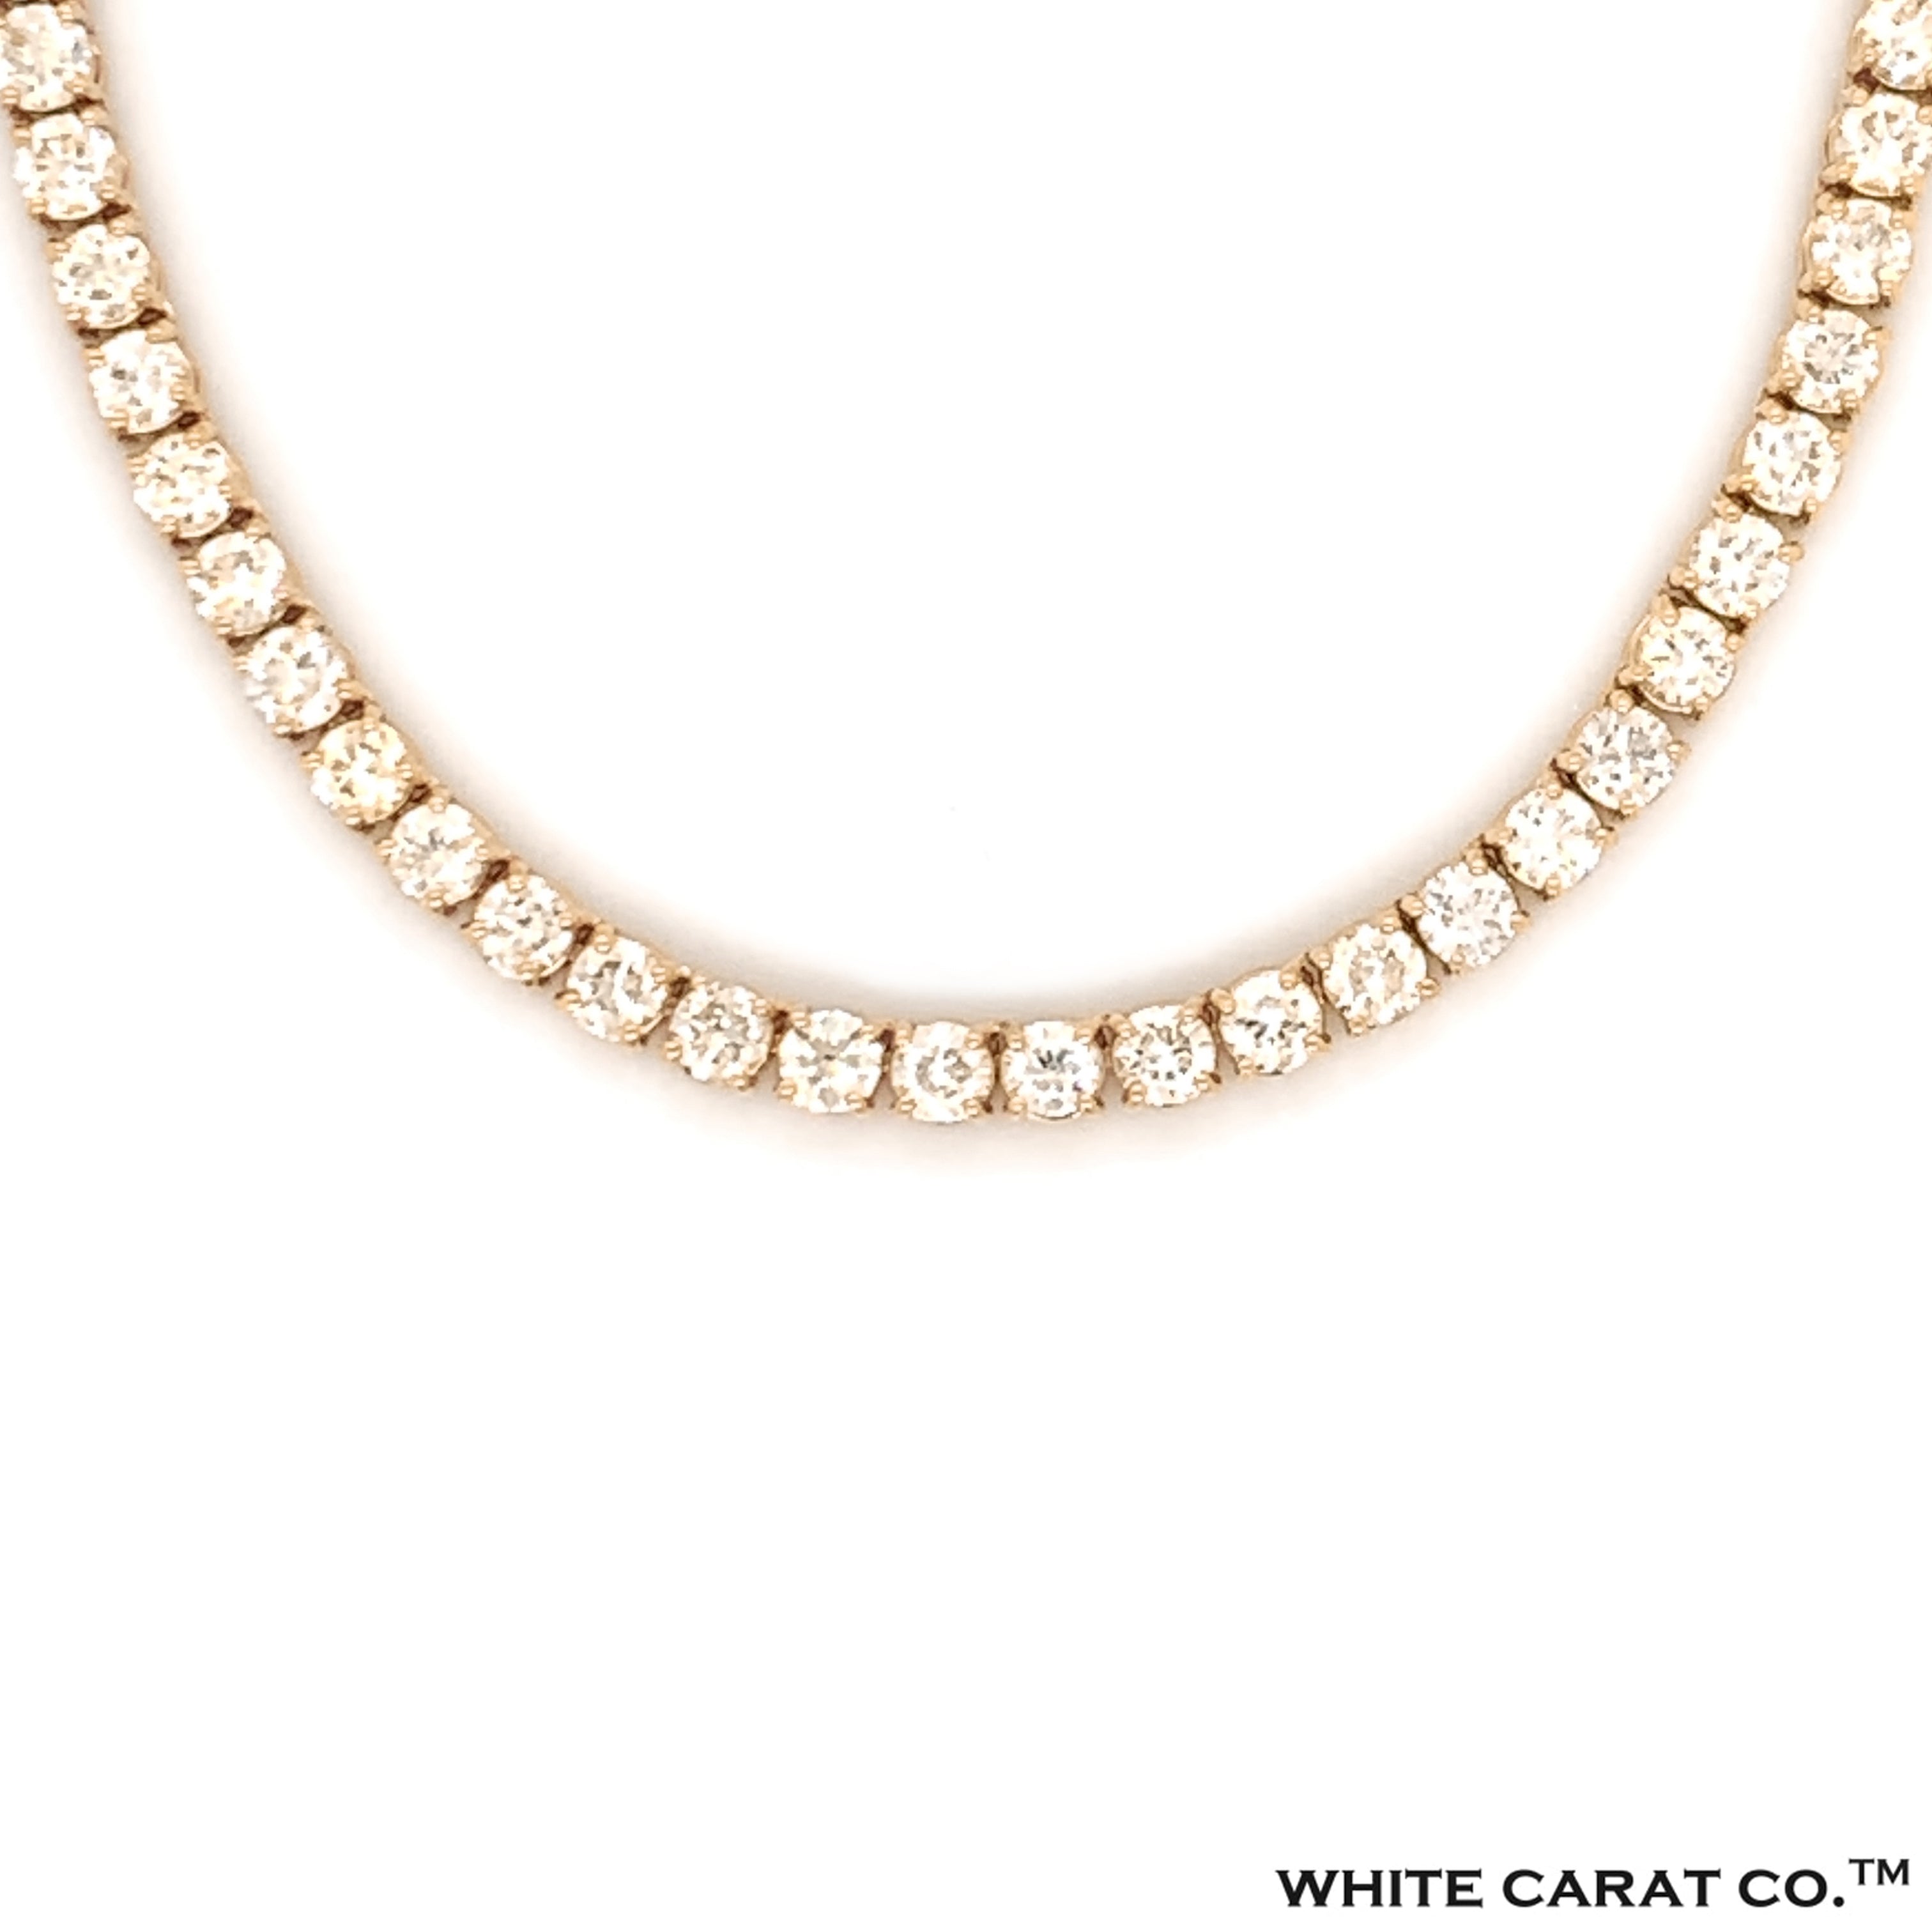 4PT- From 7.00 CT - 14.20 CT. Tennis Necklace 14K Yellow Gold (4 Prong) - White Carat - USA & Canada